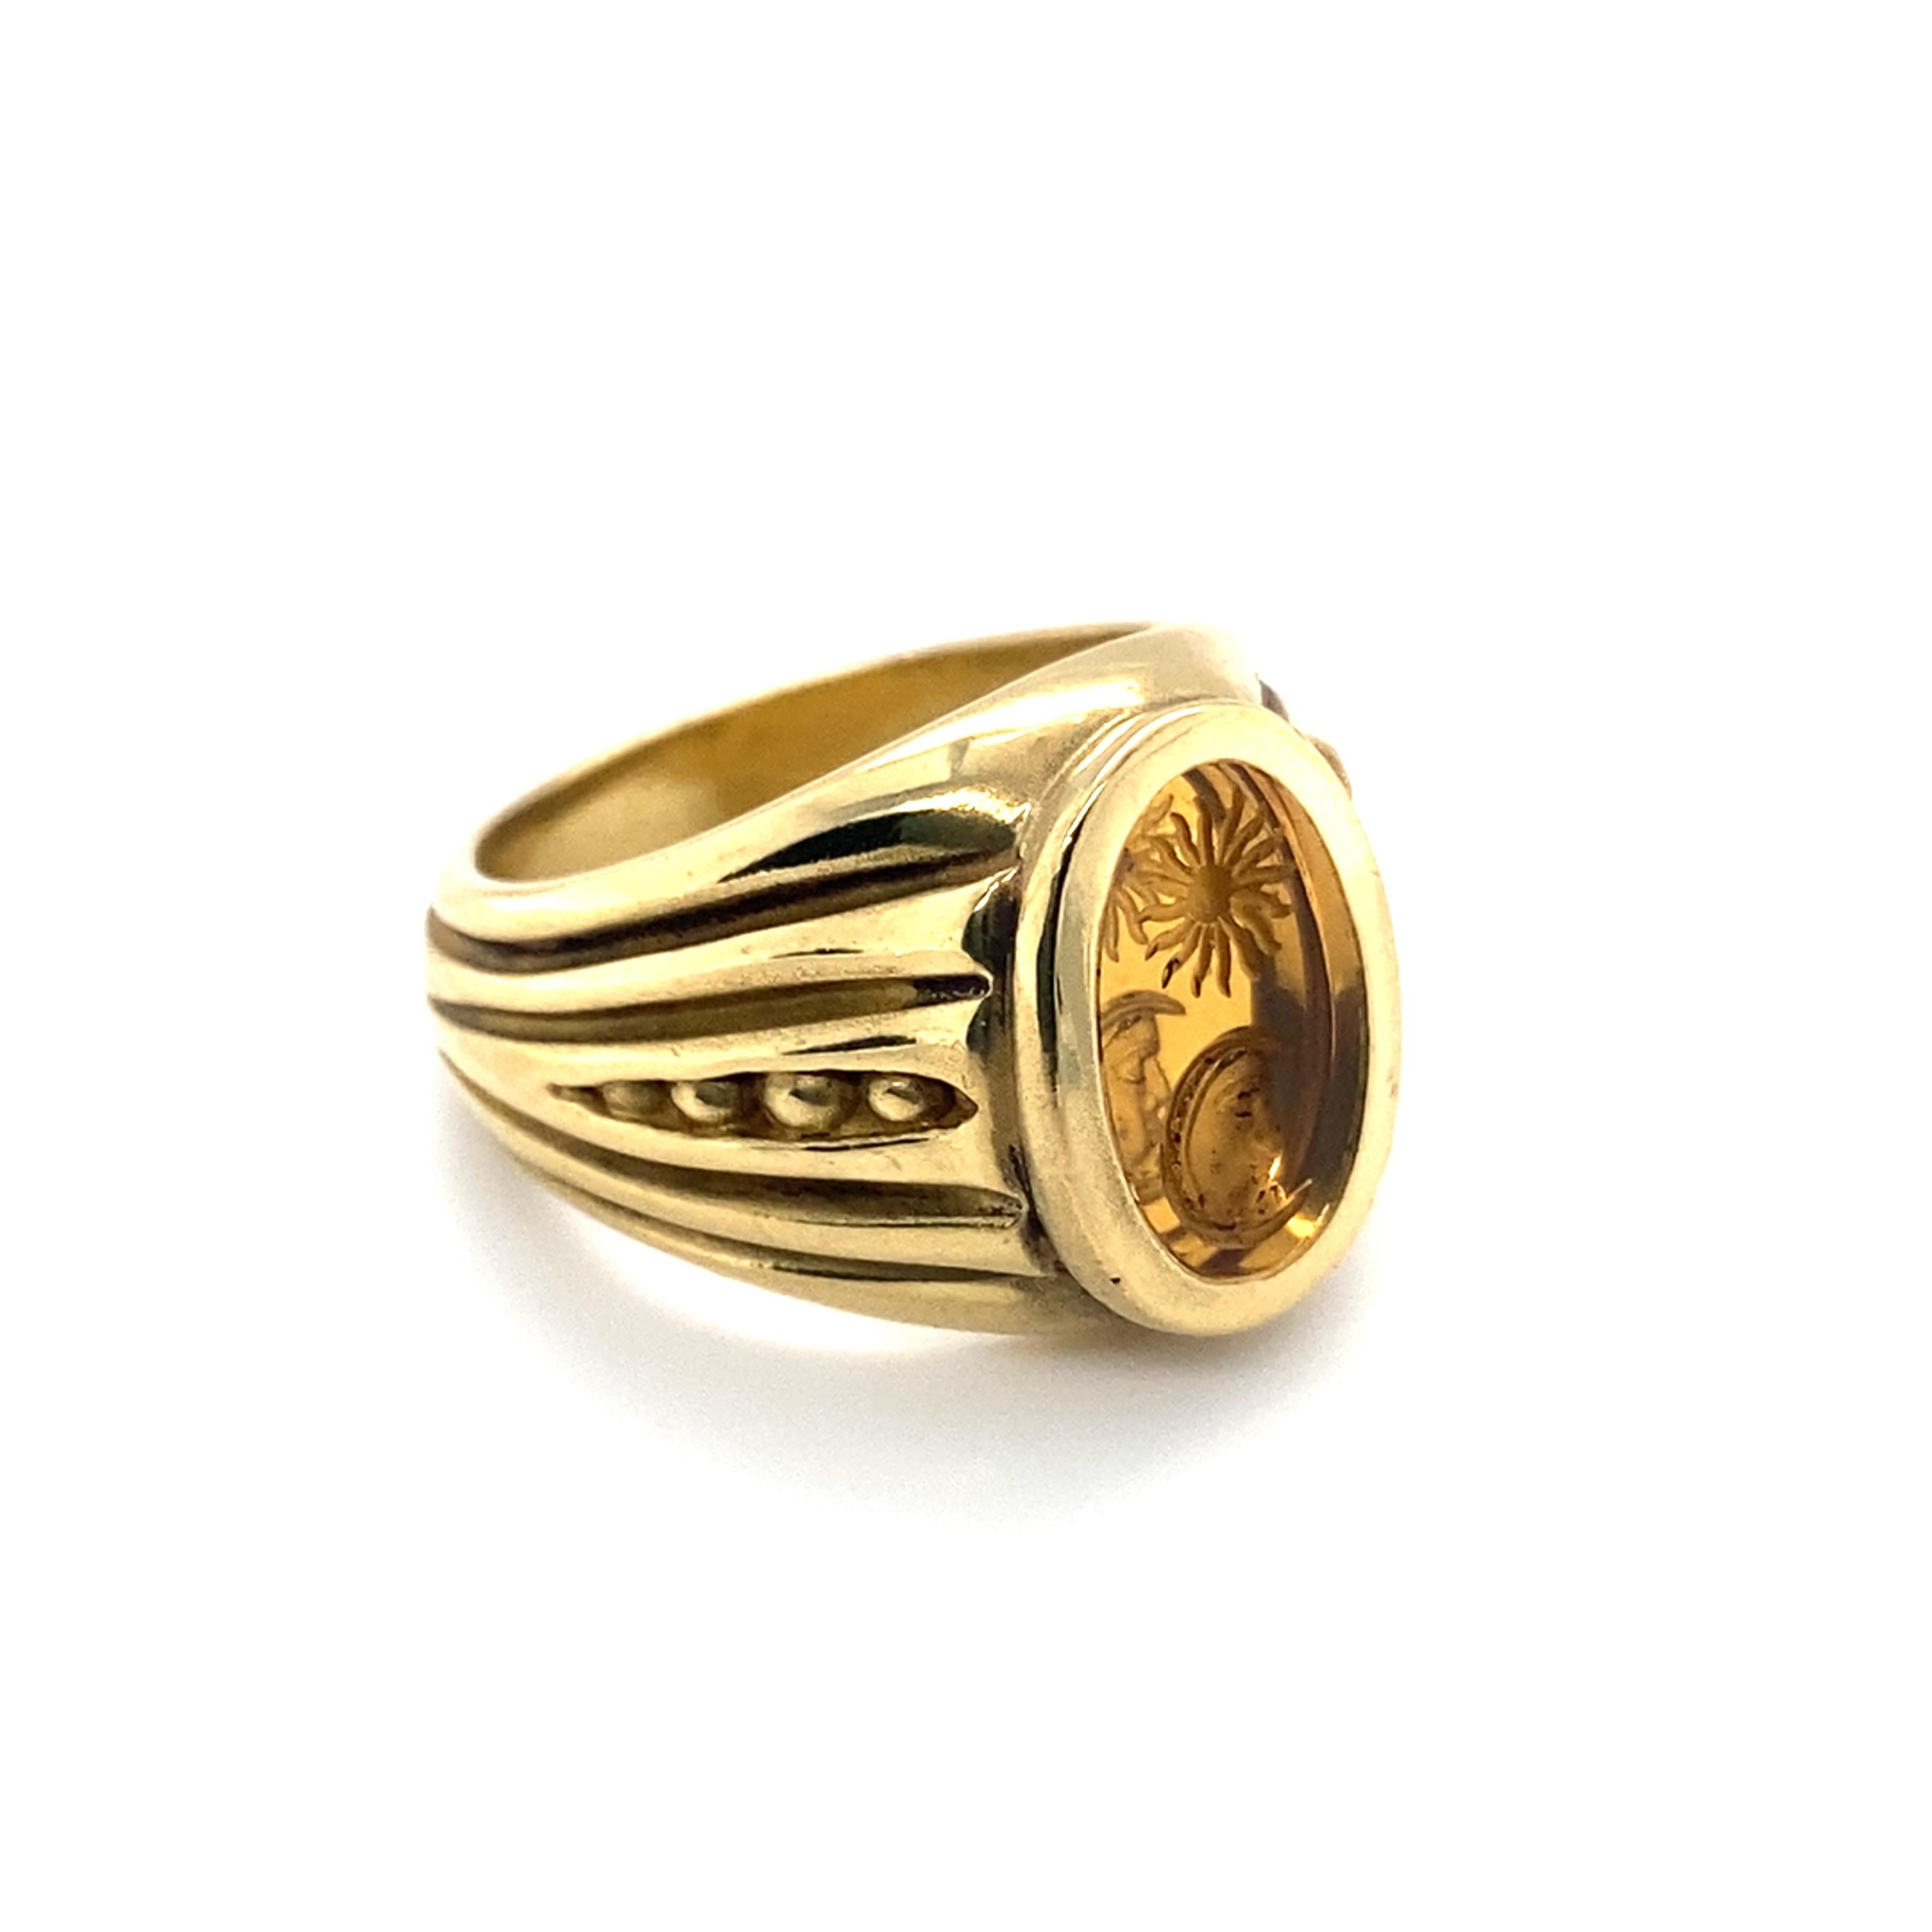 Item Details: 
Metal: 18 Karat Yellow Gold 
Weight: 14.1 grams 
Size: 6, can be resized
Hallmark: Kieselstein Cord 18K

Item Features: 
This is a beautifully and very well made classic Kieselstein-Cord Sun and Moon Ring. The center stone has a  oval